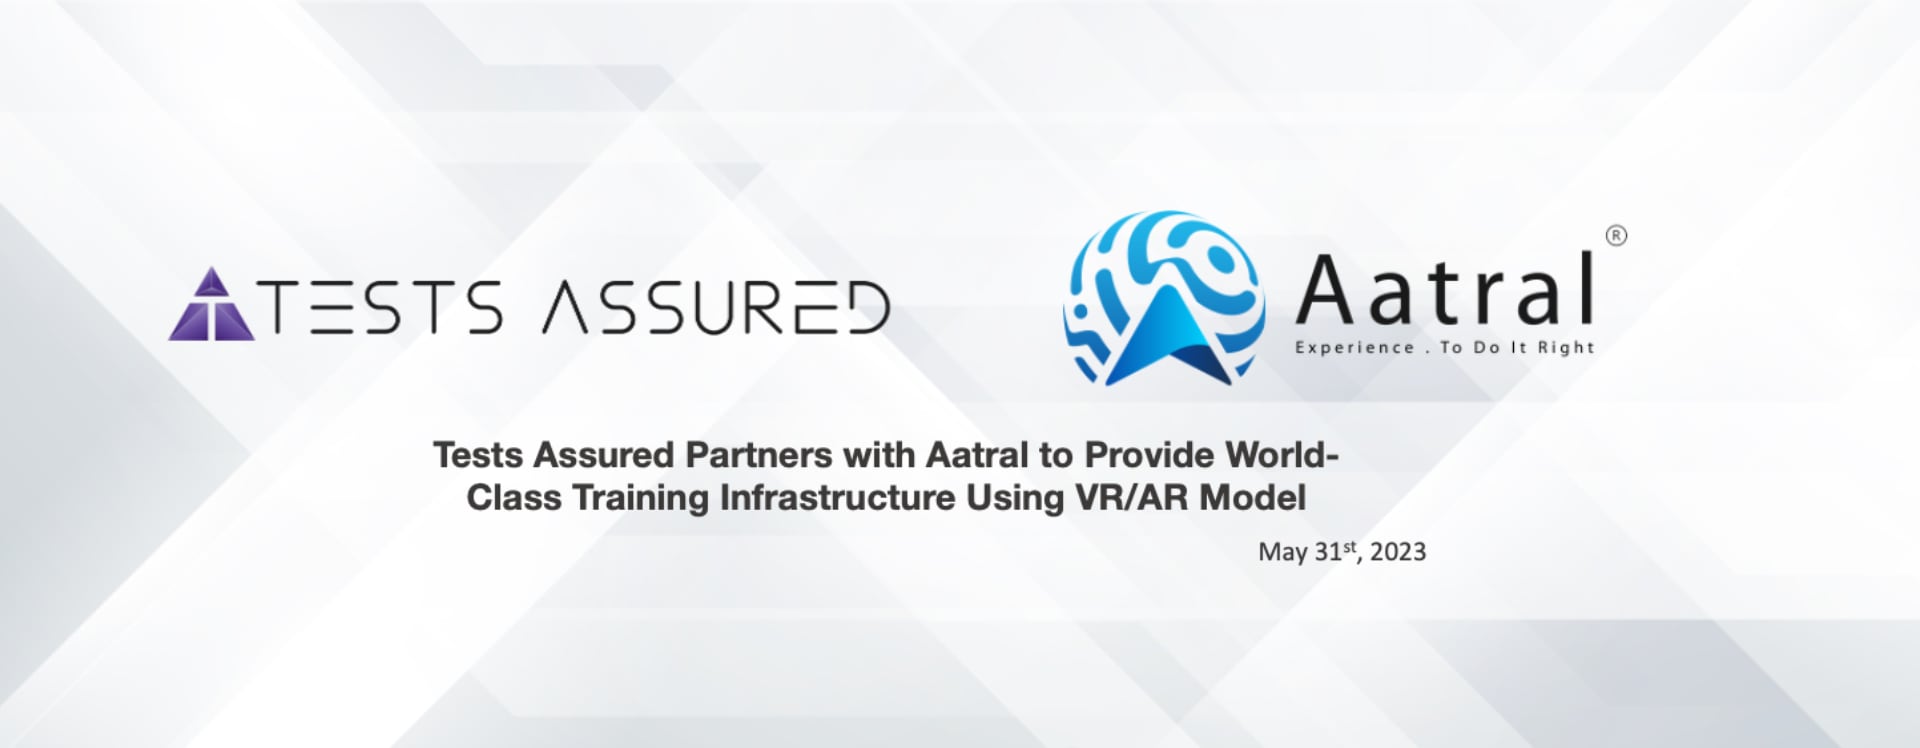 Tests Assured Partners with Astral to Provide World-Class Training Infrastructure Using VR/AR Model